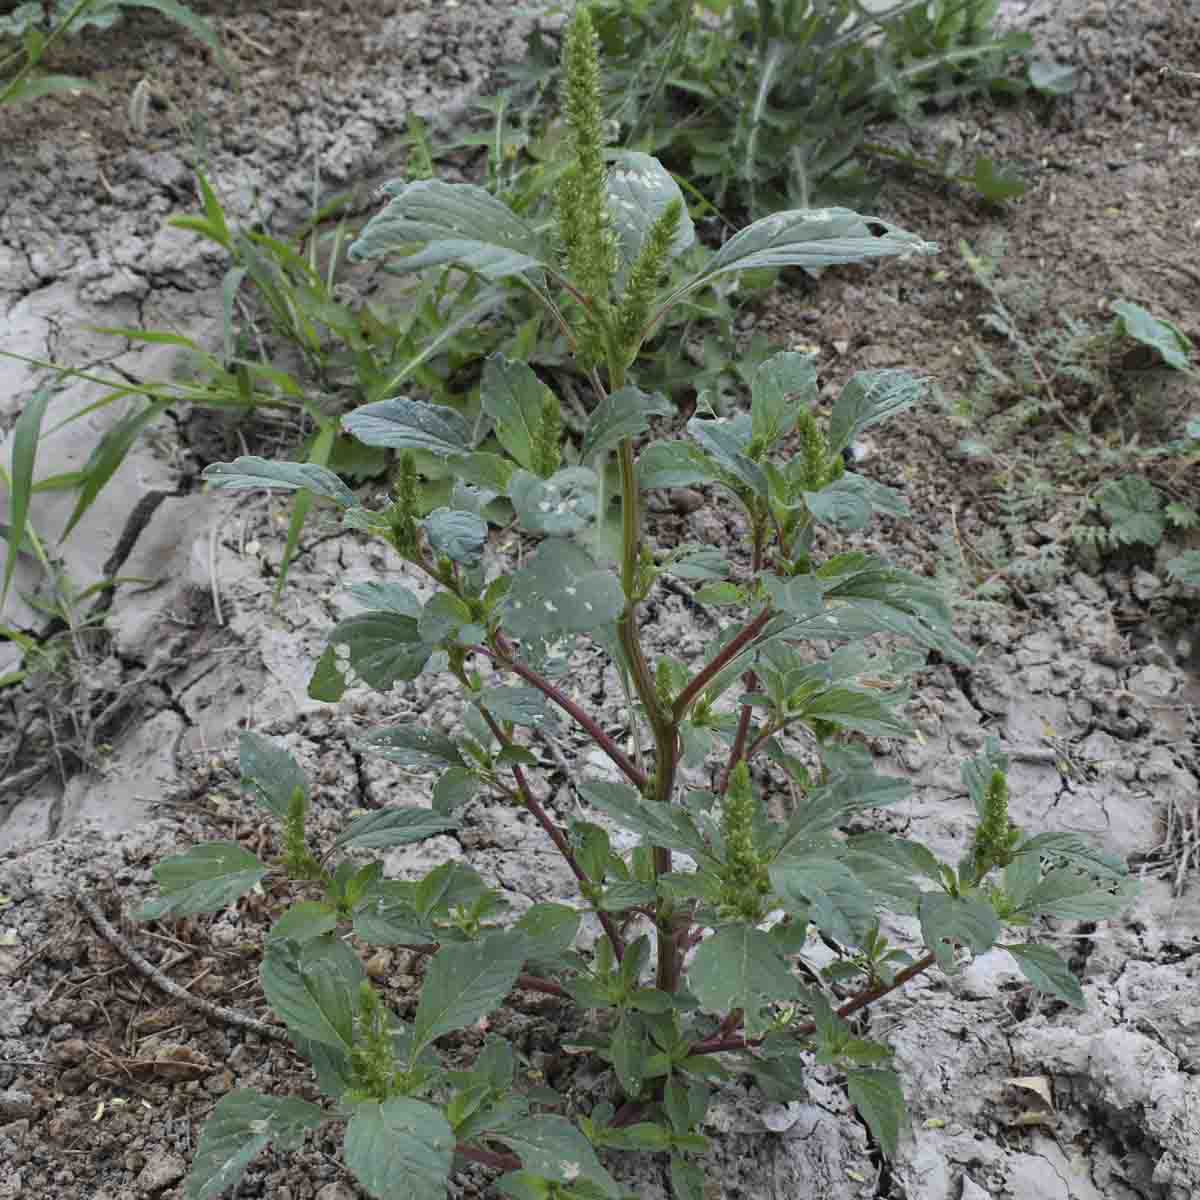 Redroot pigweed found on University of Idaho Kimberly Research and Extension Center's farm